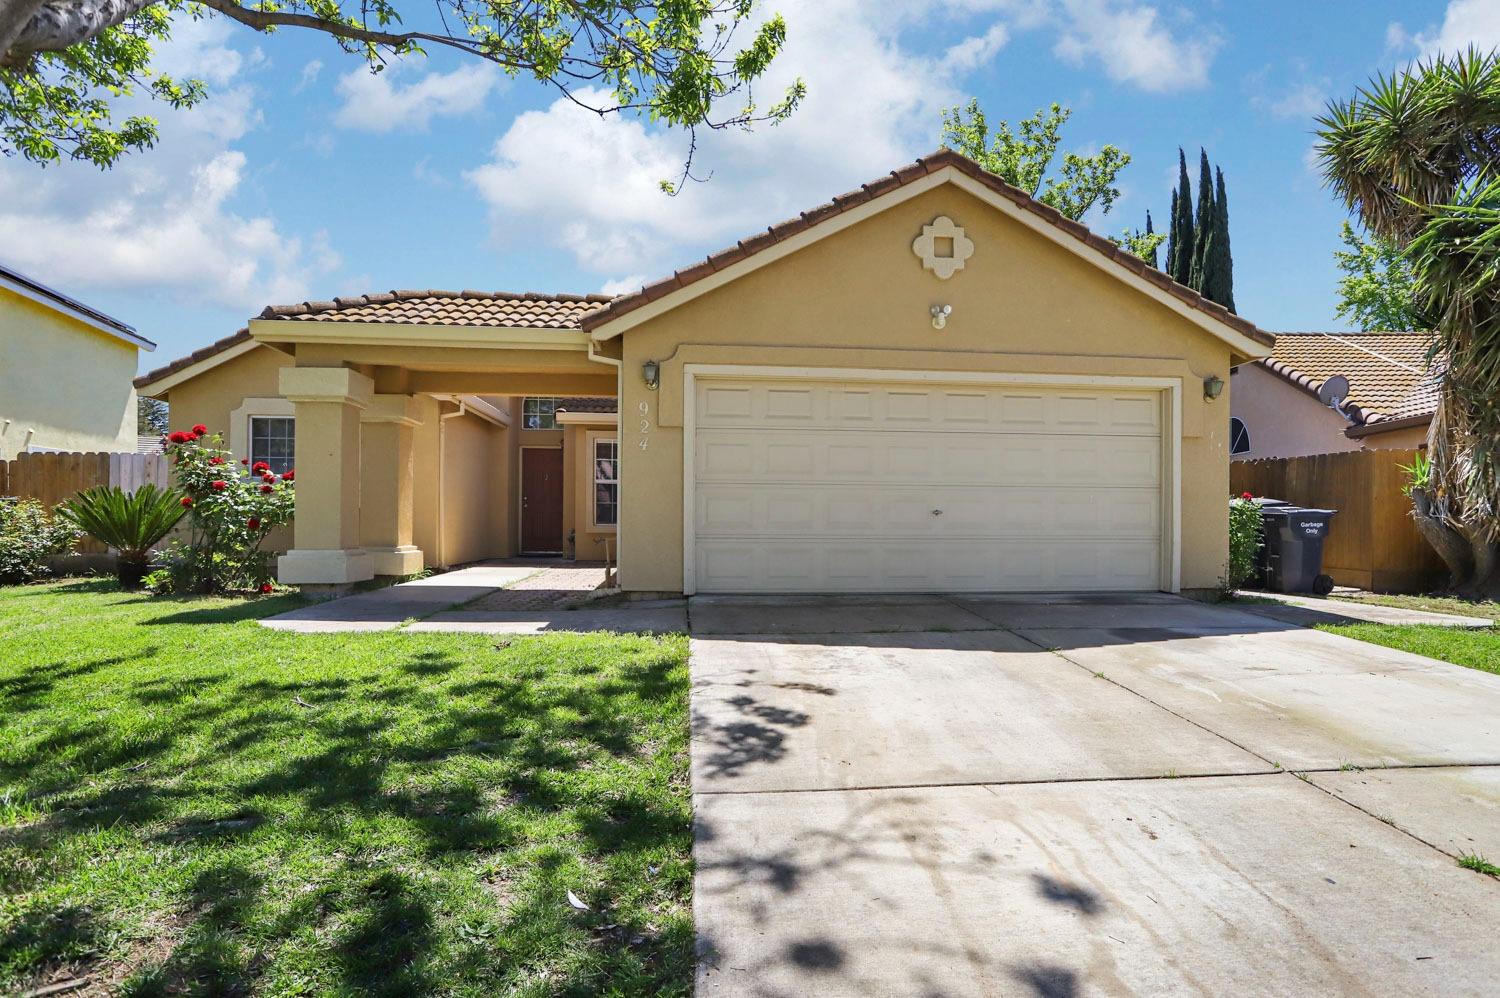 Photo of 924 Gotland Ct in Tracy, CA